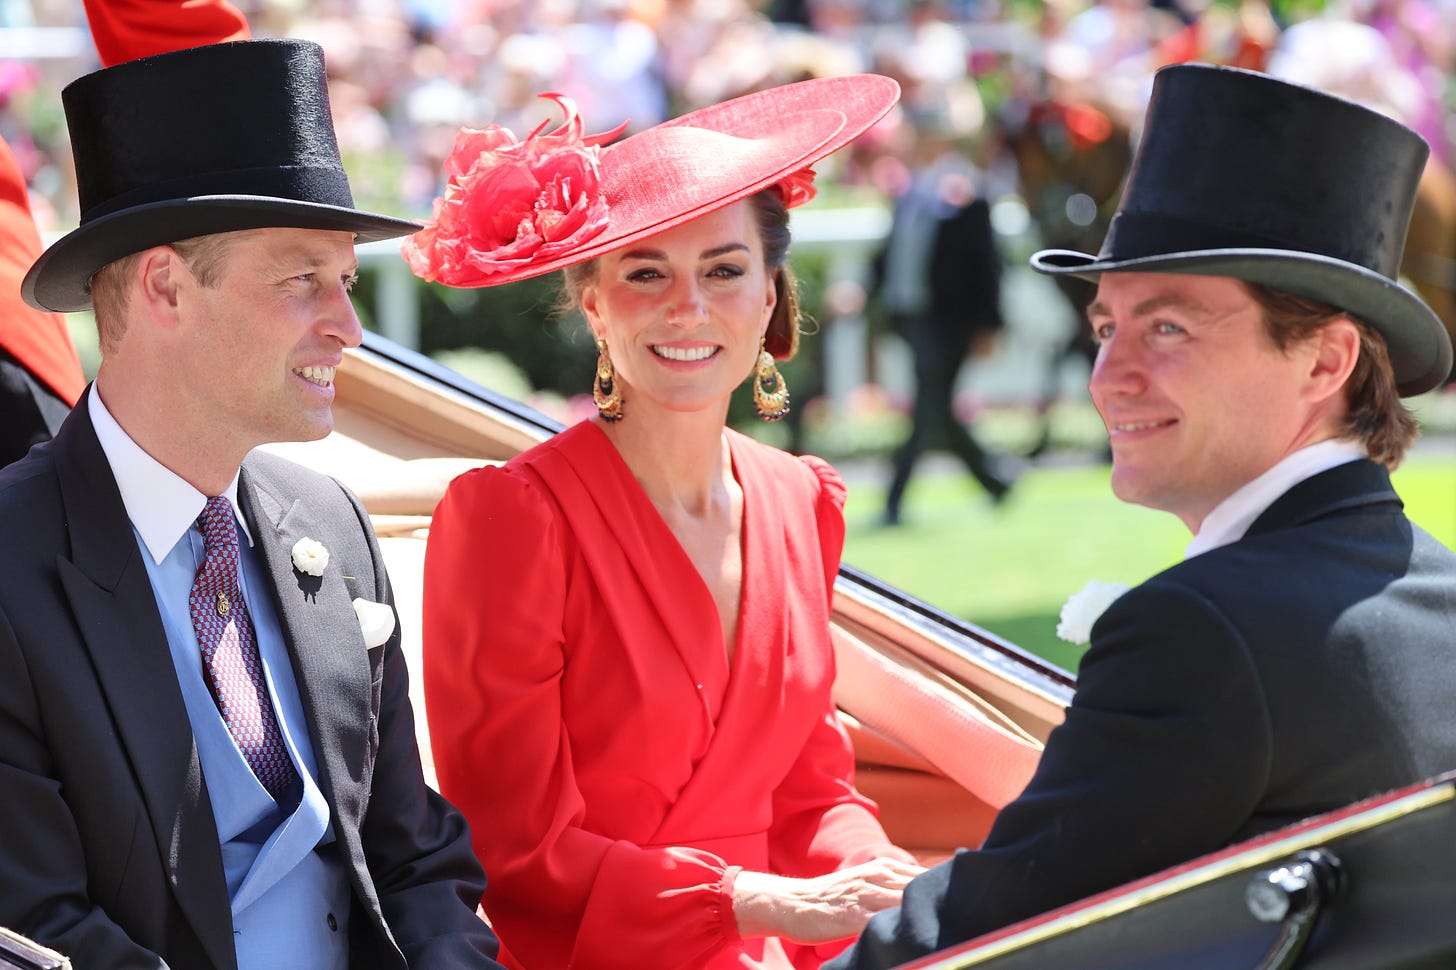 Edoardo Mapelli Mozzi with Prince William and Princess Kate in a carriage at Royal Ascot